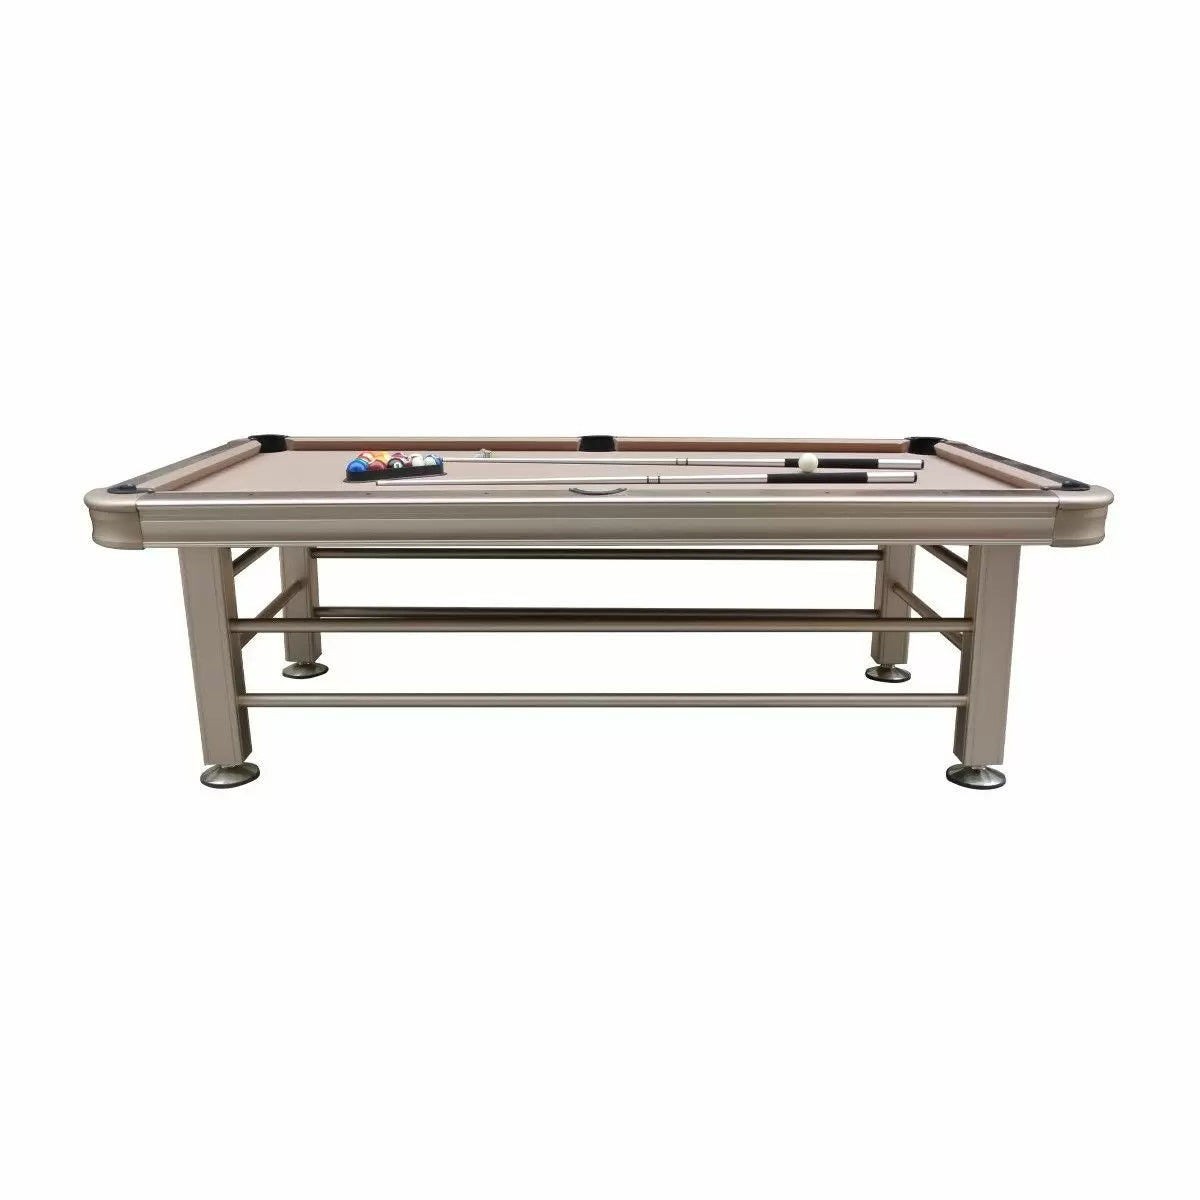 Imperial 7ft Outdoor Pool Table Champagne side